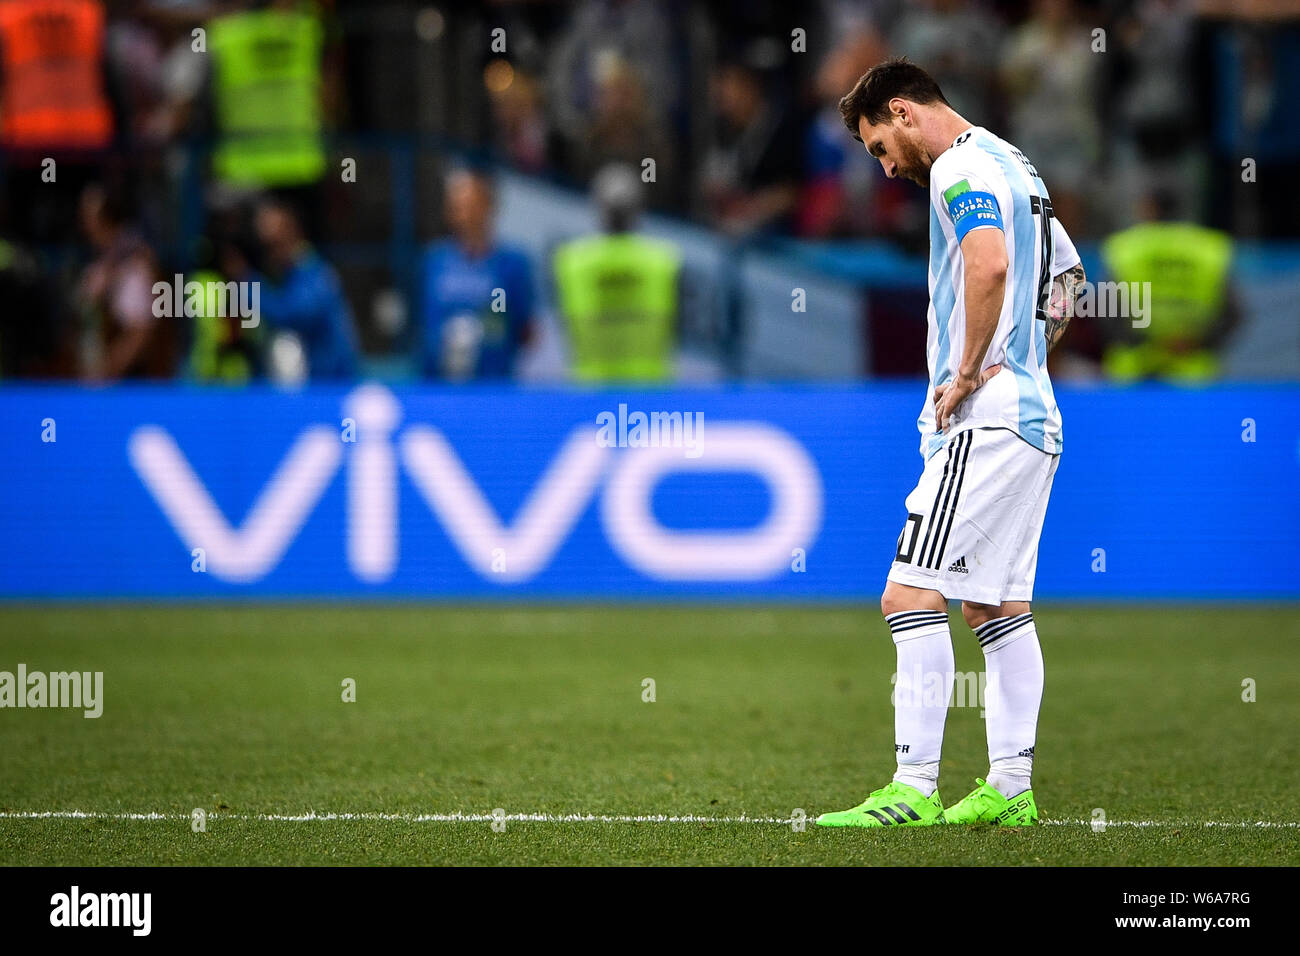 Lionel Messi of Argentina reacts after Luka Modric of Croatia scored a goal in their Group D match during the 2018 FIFA World Cup in Nizhny Novgorod, Stock Photo